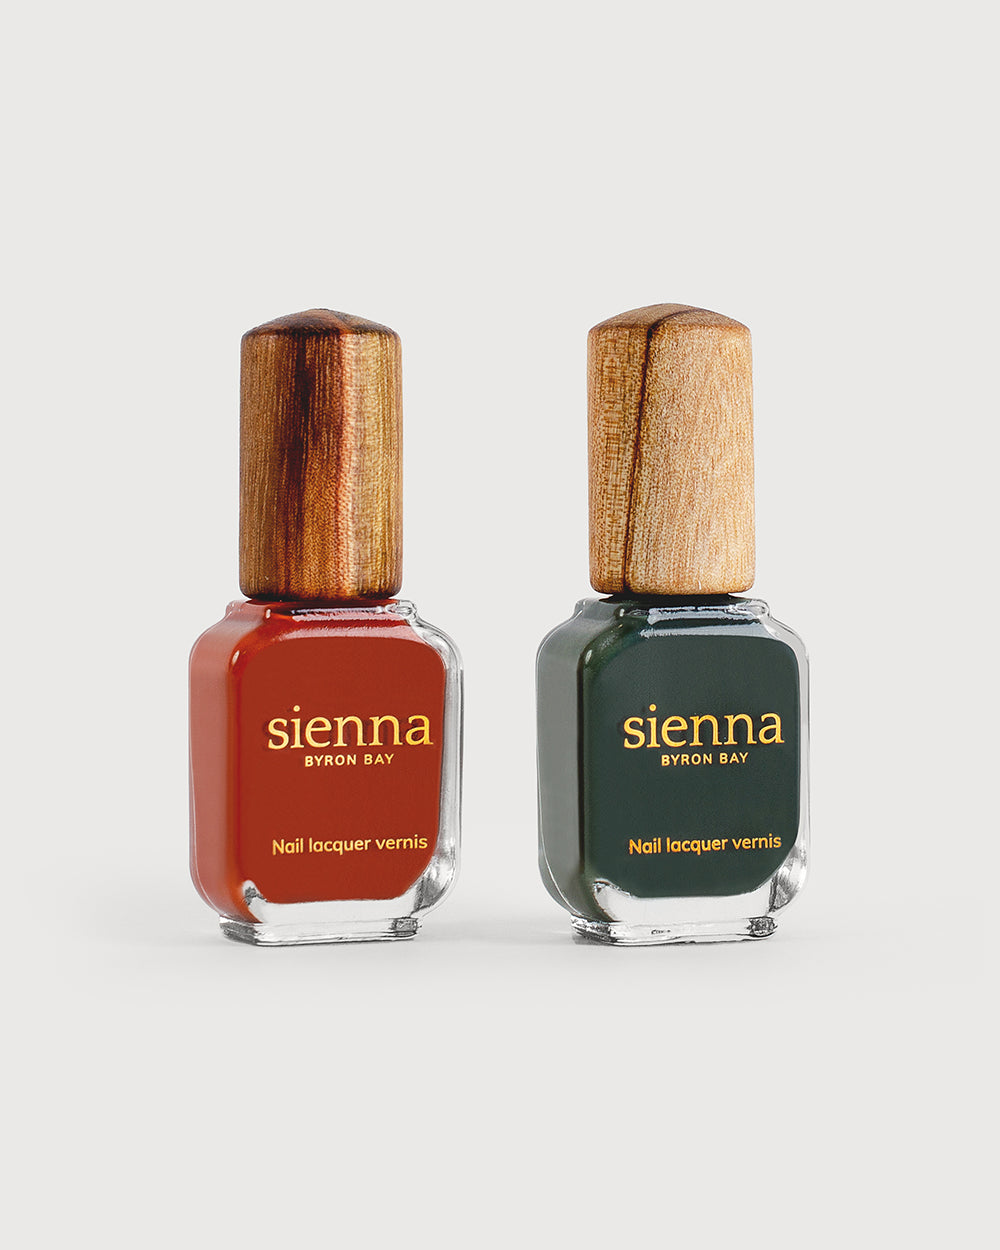 Mid-tone terracotta, Deep olive nail polish bottles with timber cap